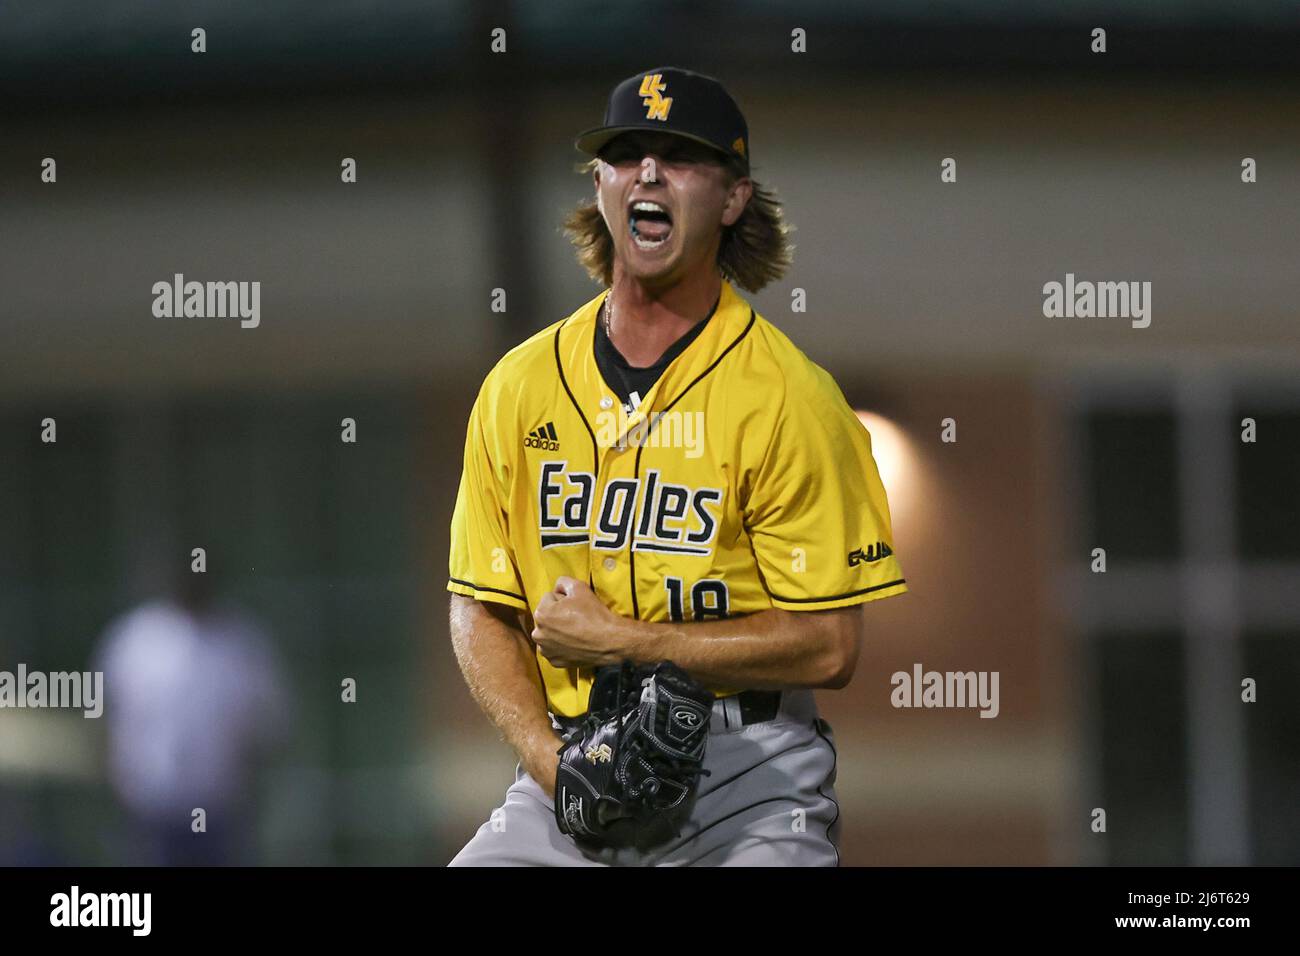 May 03, 2022: Southern Miss pitcher Dalton Rogers (18) celebrates a 6-4 victory after the last out during a college baseball game, between the Southern Miss Golden Eagles and the South Alabama Jaguars at Stanky Field in Mobile, Alabama. Bobby McDuffie/CSM Stock Photo